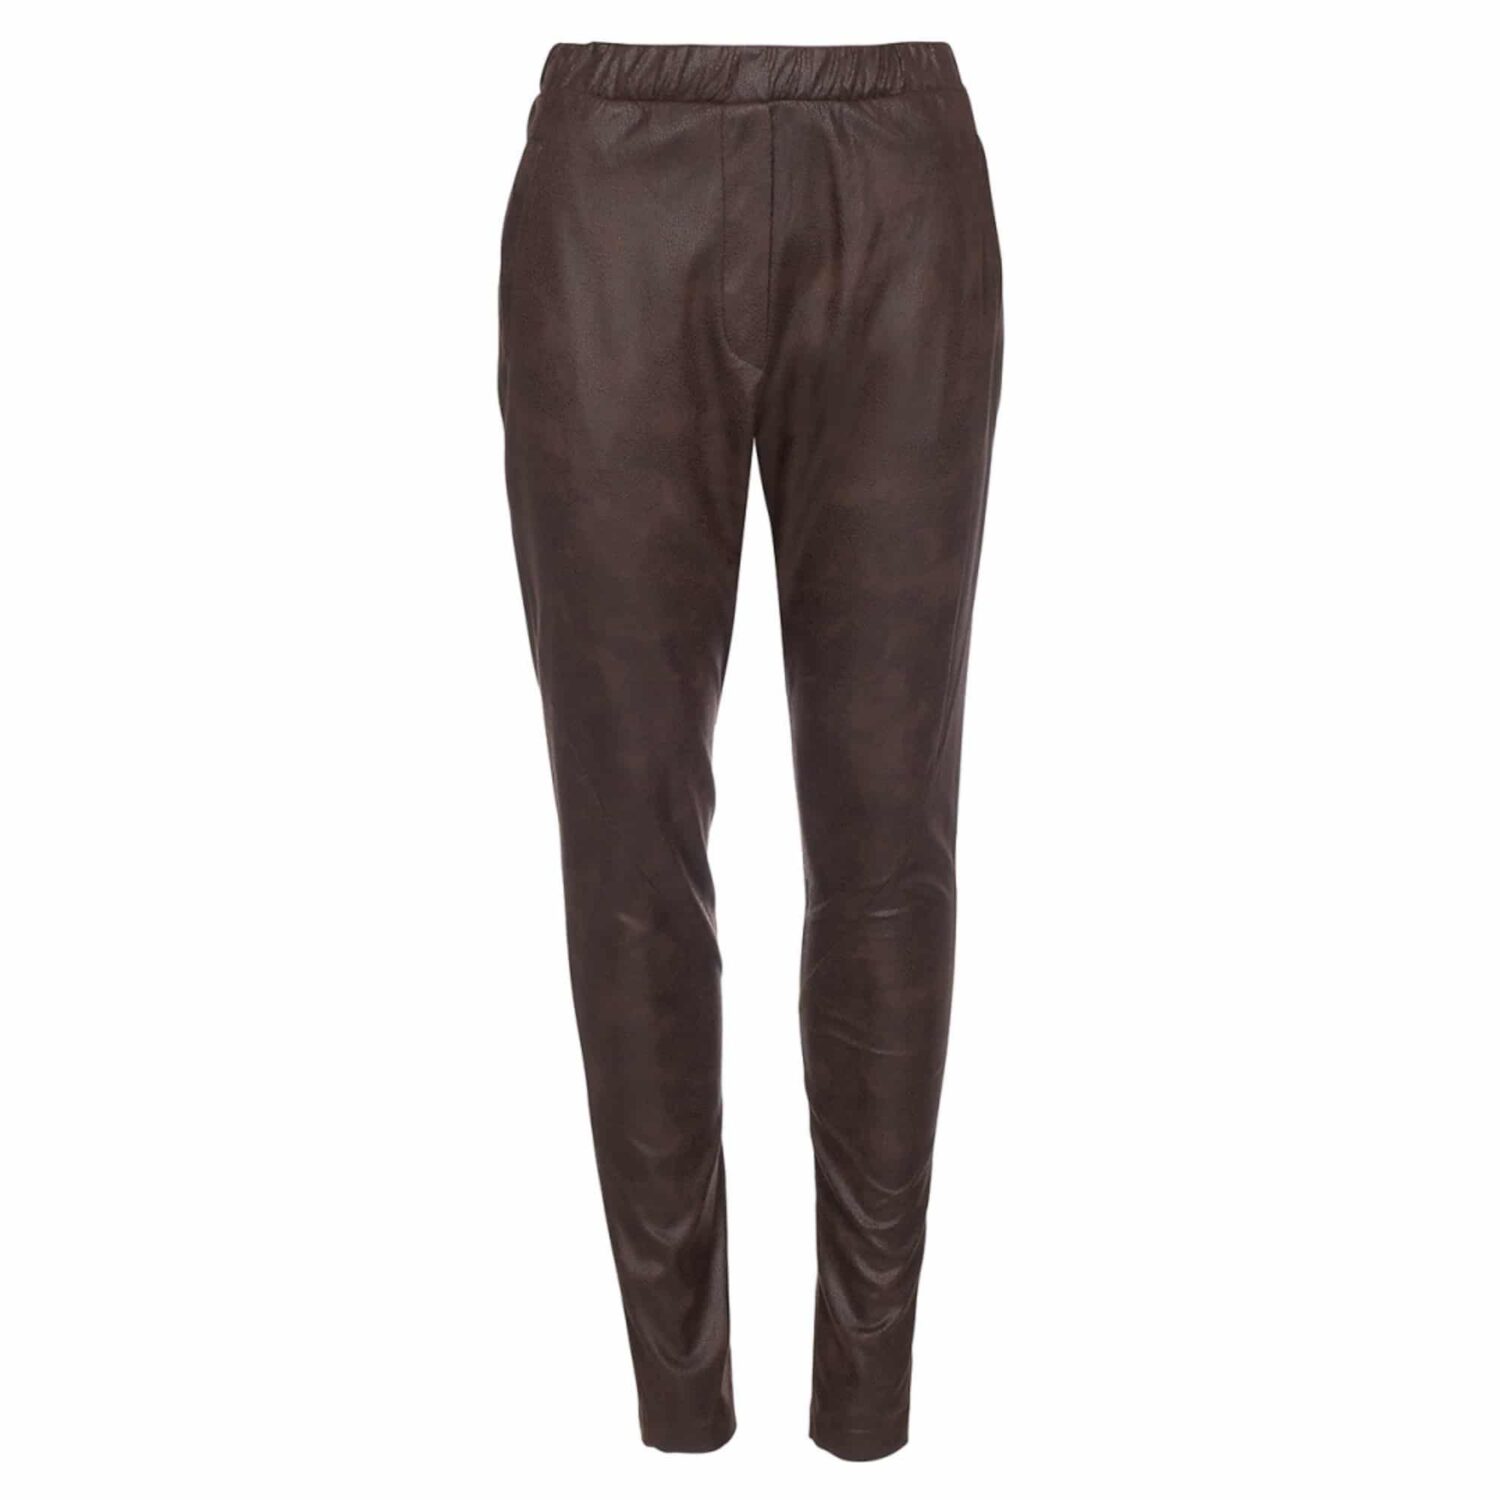 One Two Luxzuz Bellis Pant Choko Lux